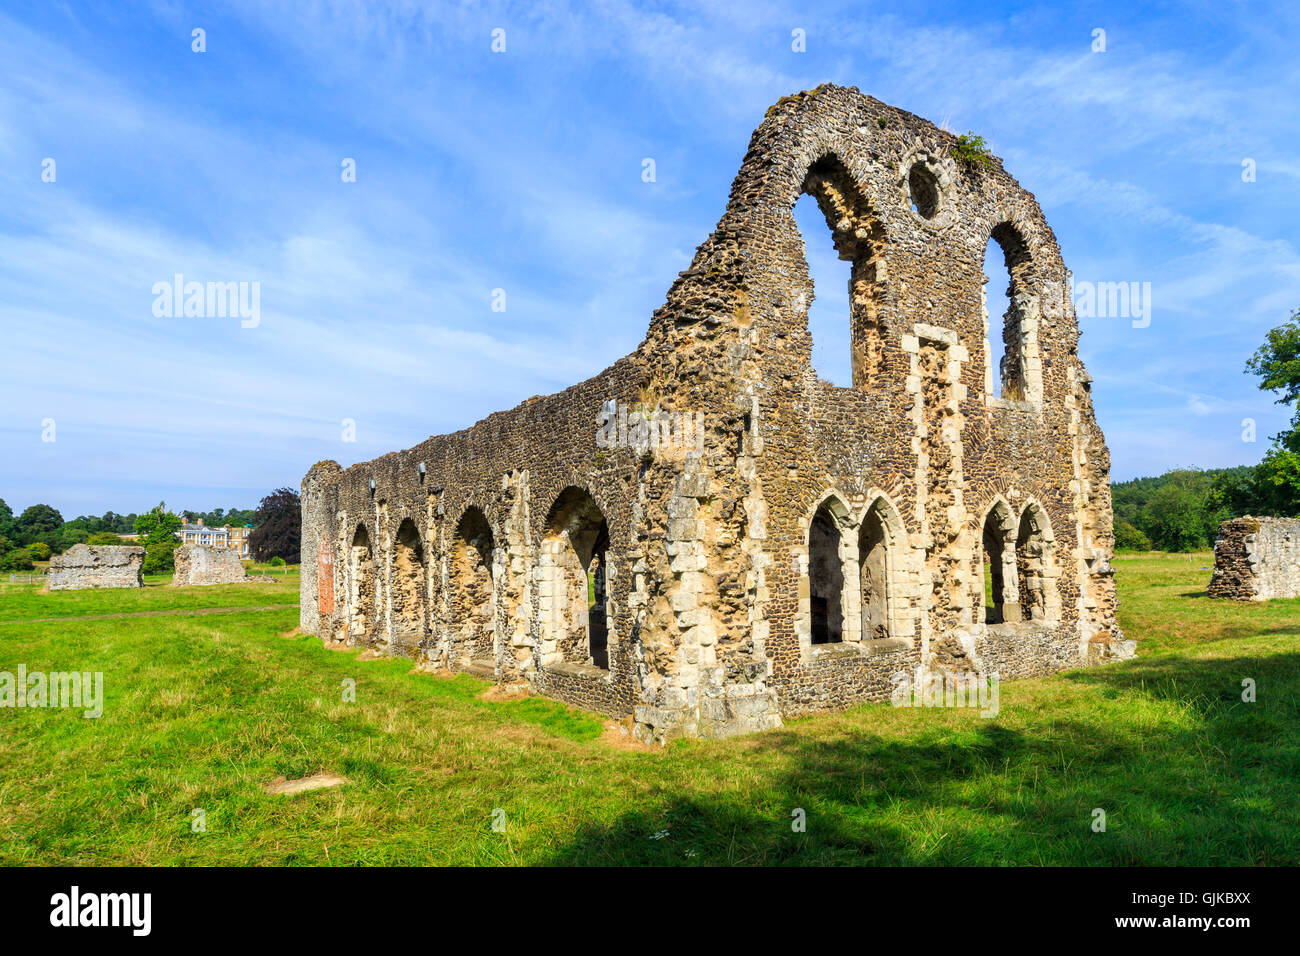 Ruins of Waverley Abbey, founded in 1128, the first Cistercian abbey in England, a Scheduled Ancient Monument, near Farnham Stock Photo